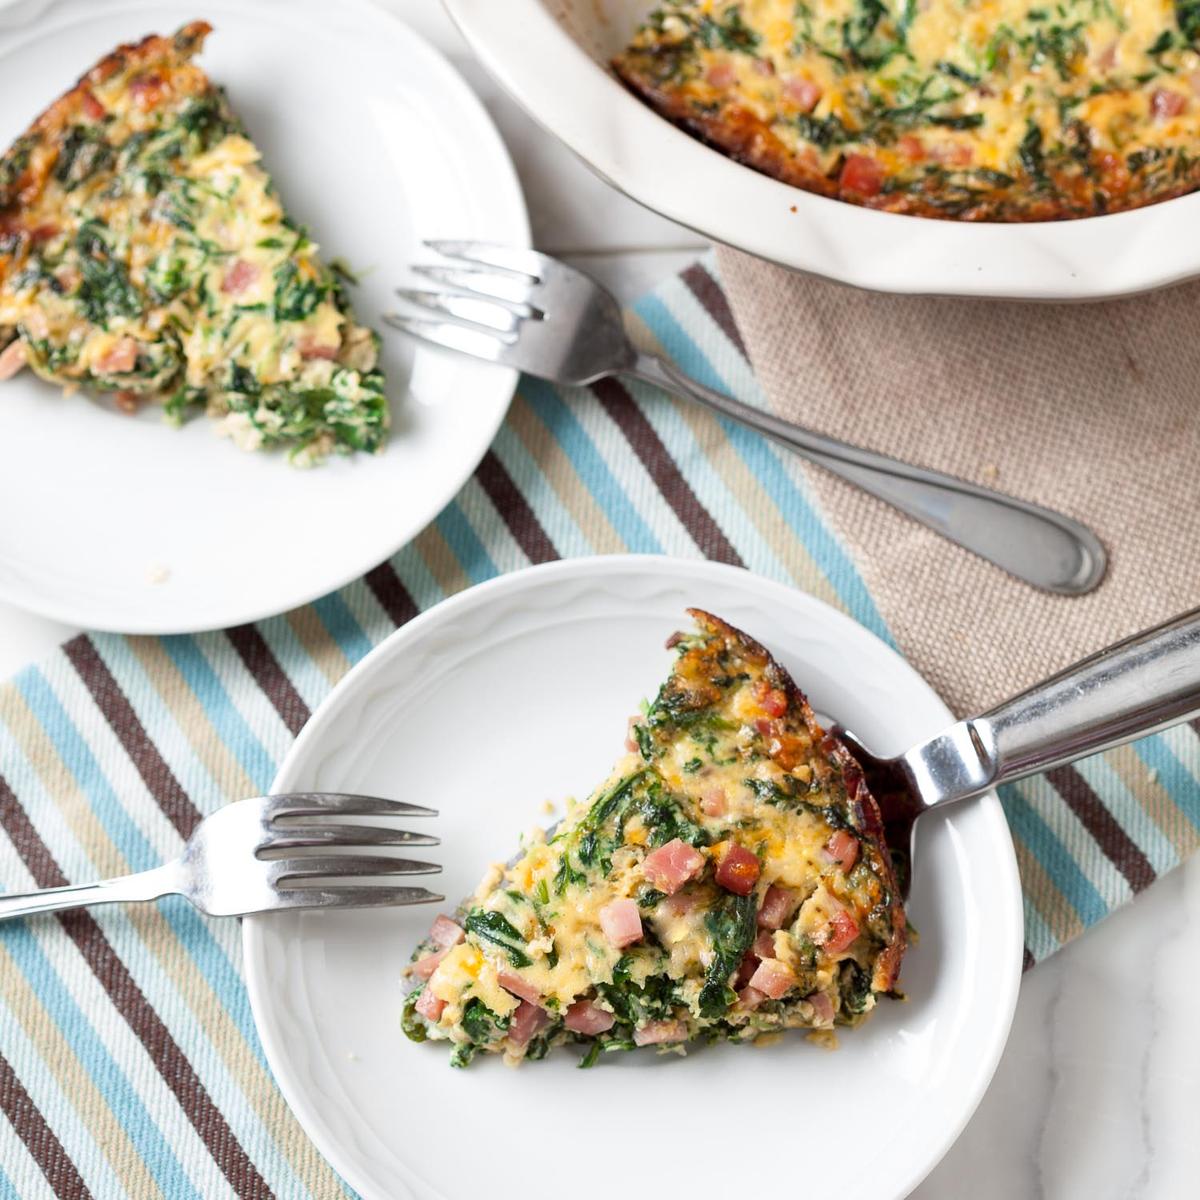 This crustless quiche will have all your guests begging for more. (Courtesy of Amy Dong)